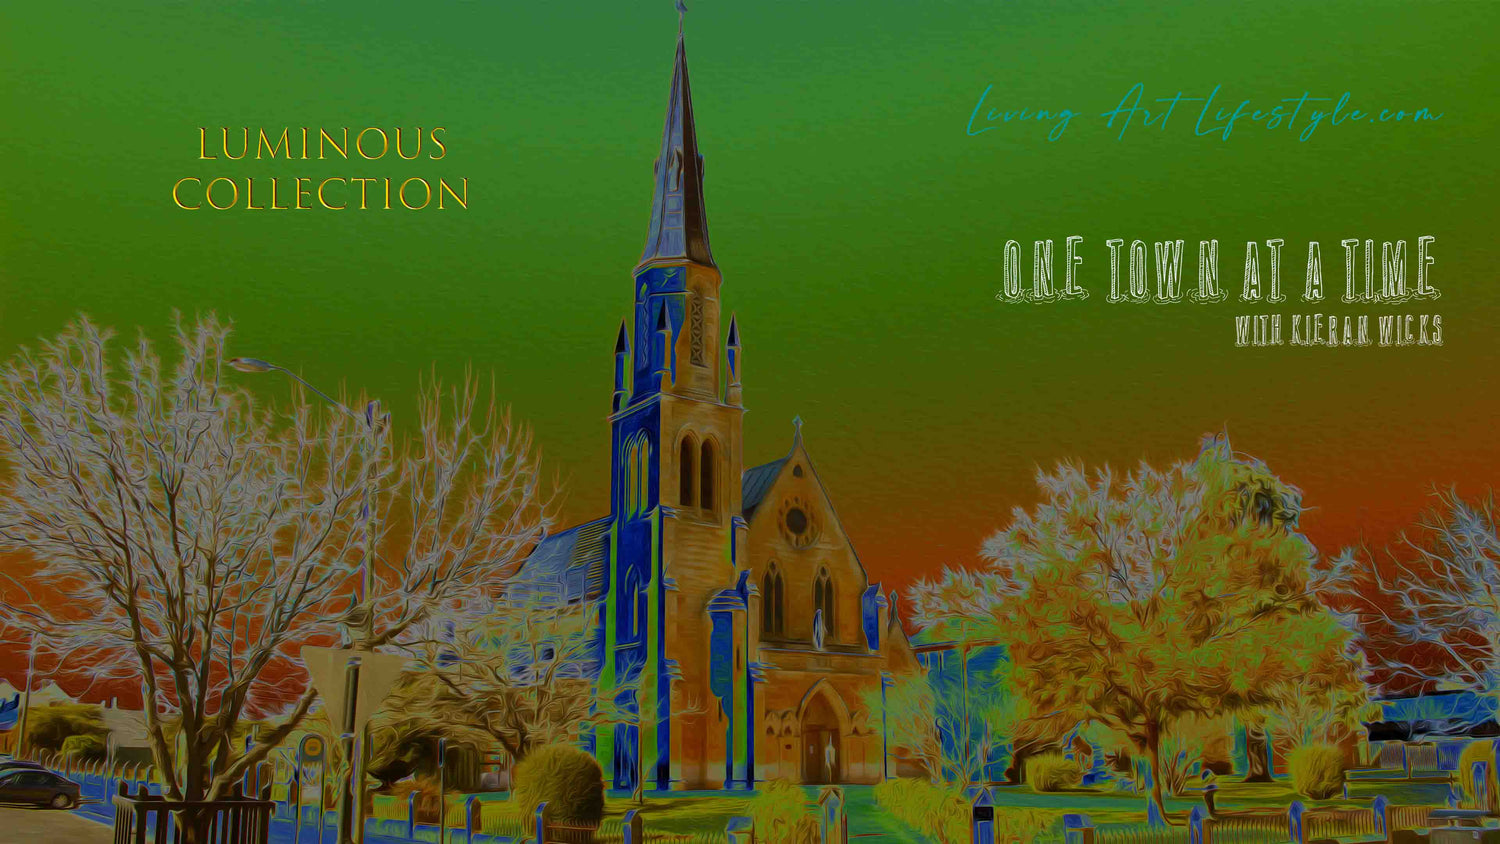 LUMINOUS COLLECTION DESIGN BASED ON THE CATHOLIC CHURCH MUDGEE -Green and Orange colours Drawing Design